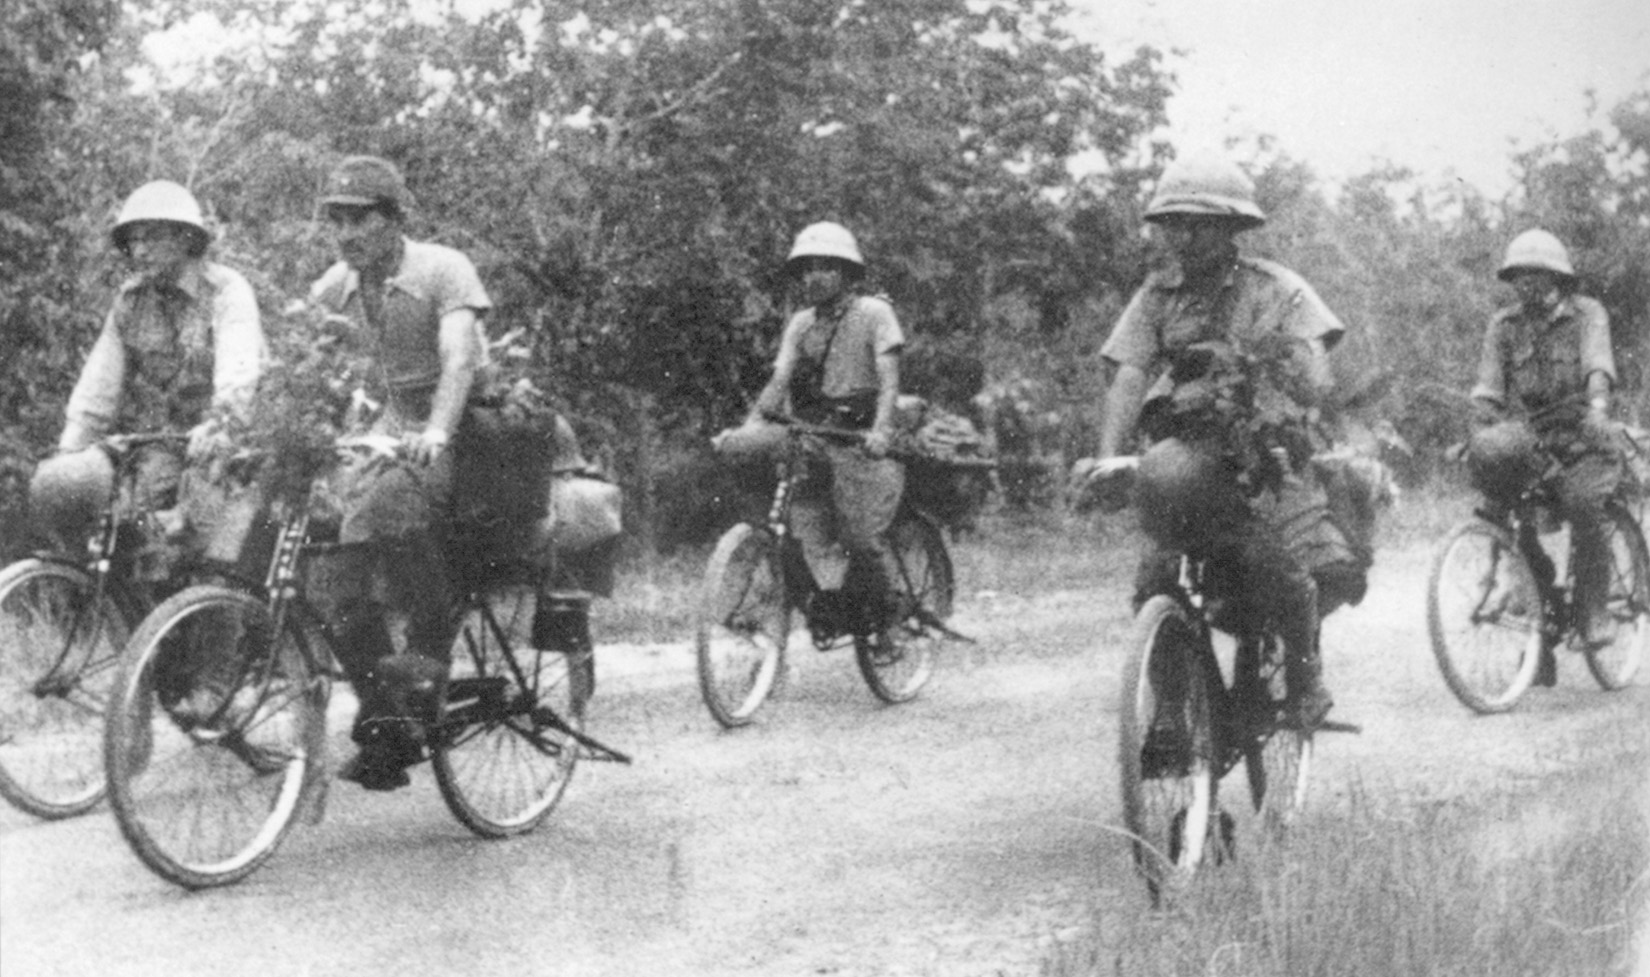 Riding bicycles, a Japanese unit rolls rapidly forward during the advance on Singapore. When the tires went flat, the soldiers continued to ride on the metal rims.